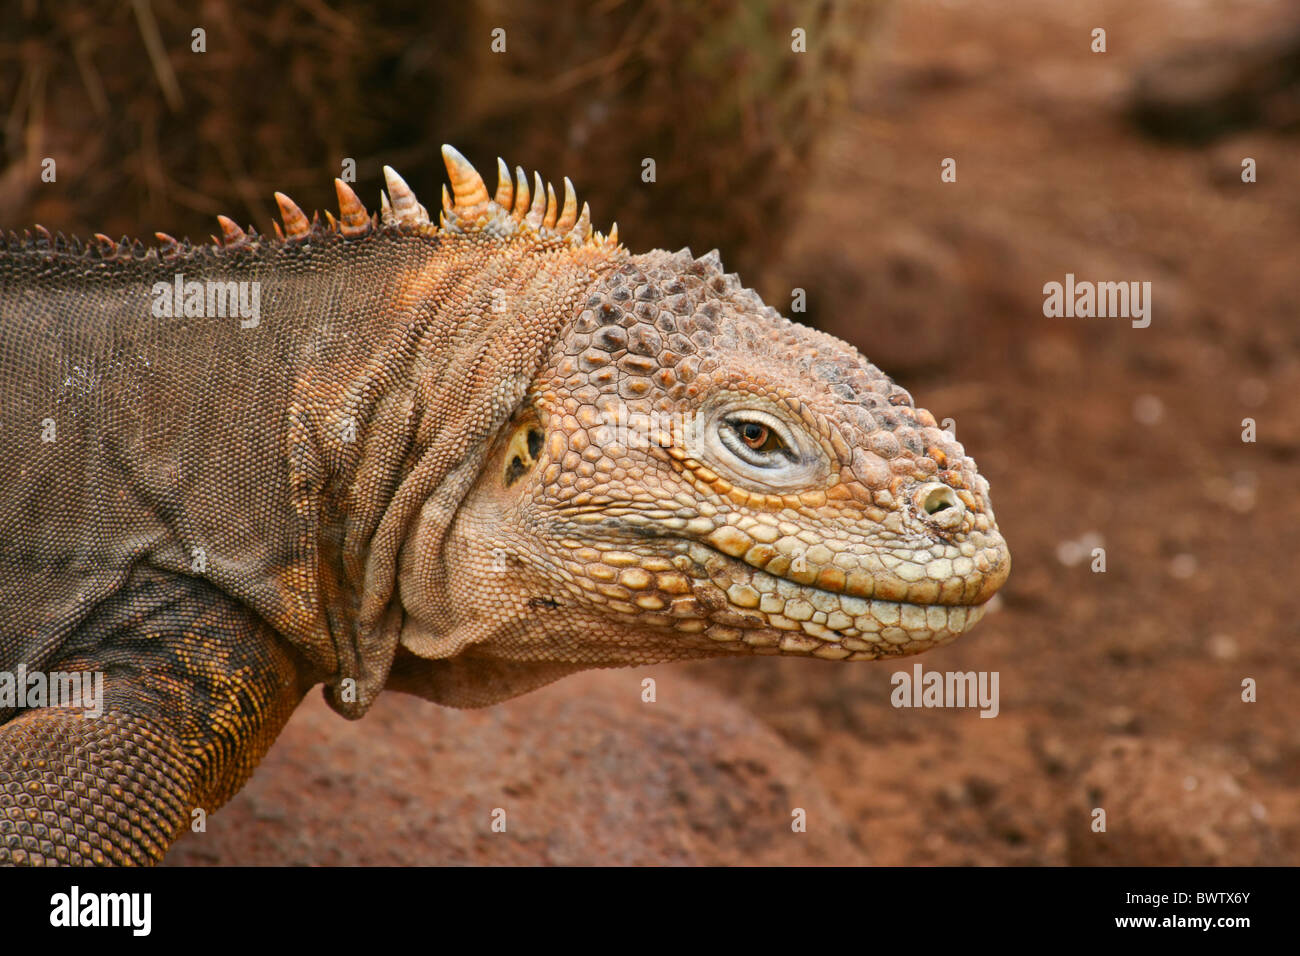 Galápagos Land Iguana in it's habitat. The brown-yellow scaly skin blends in perfectly with the iron-colored soil of Rabida Island. Stock Photo